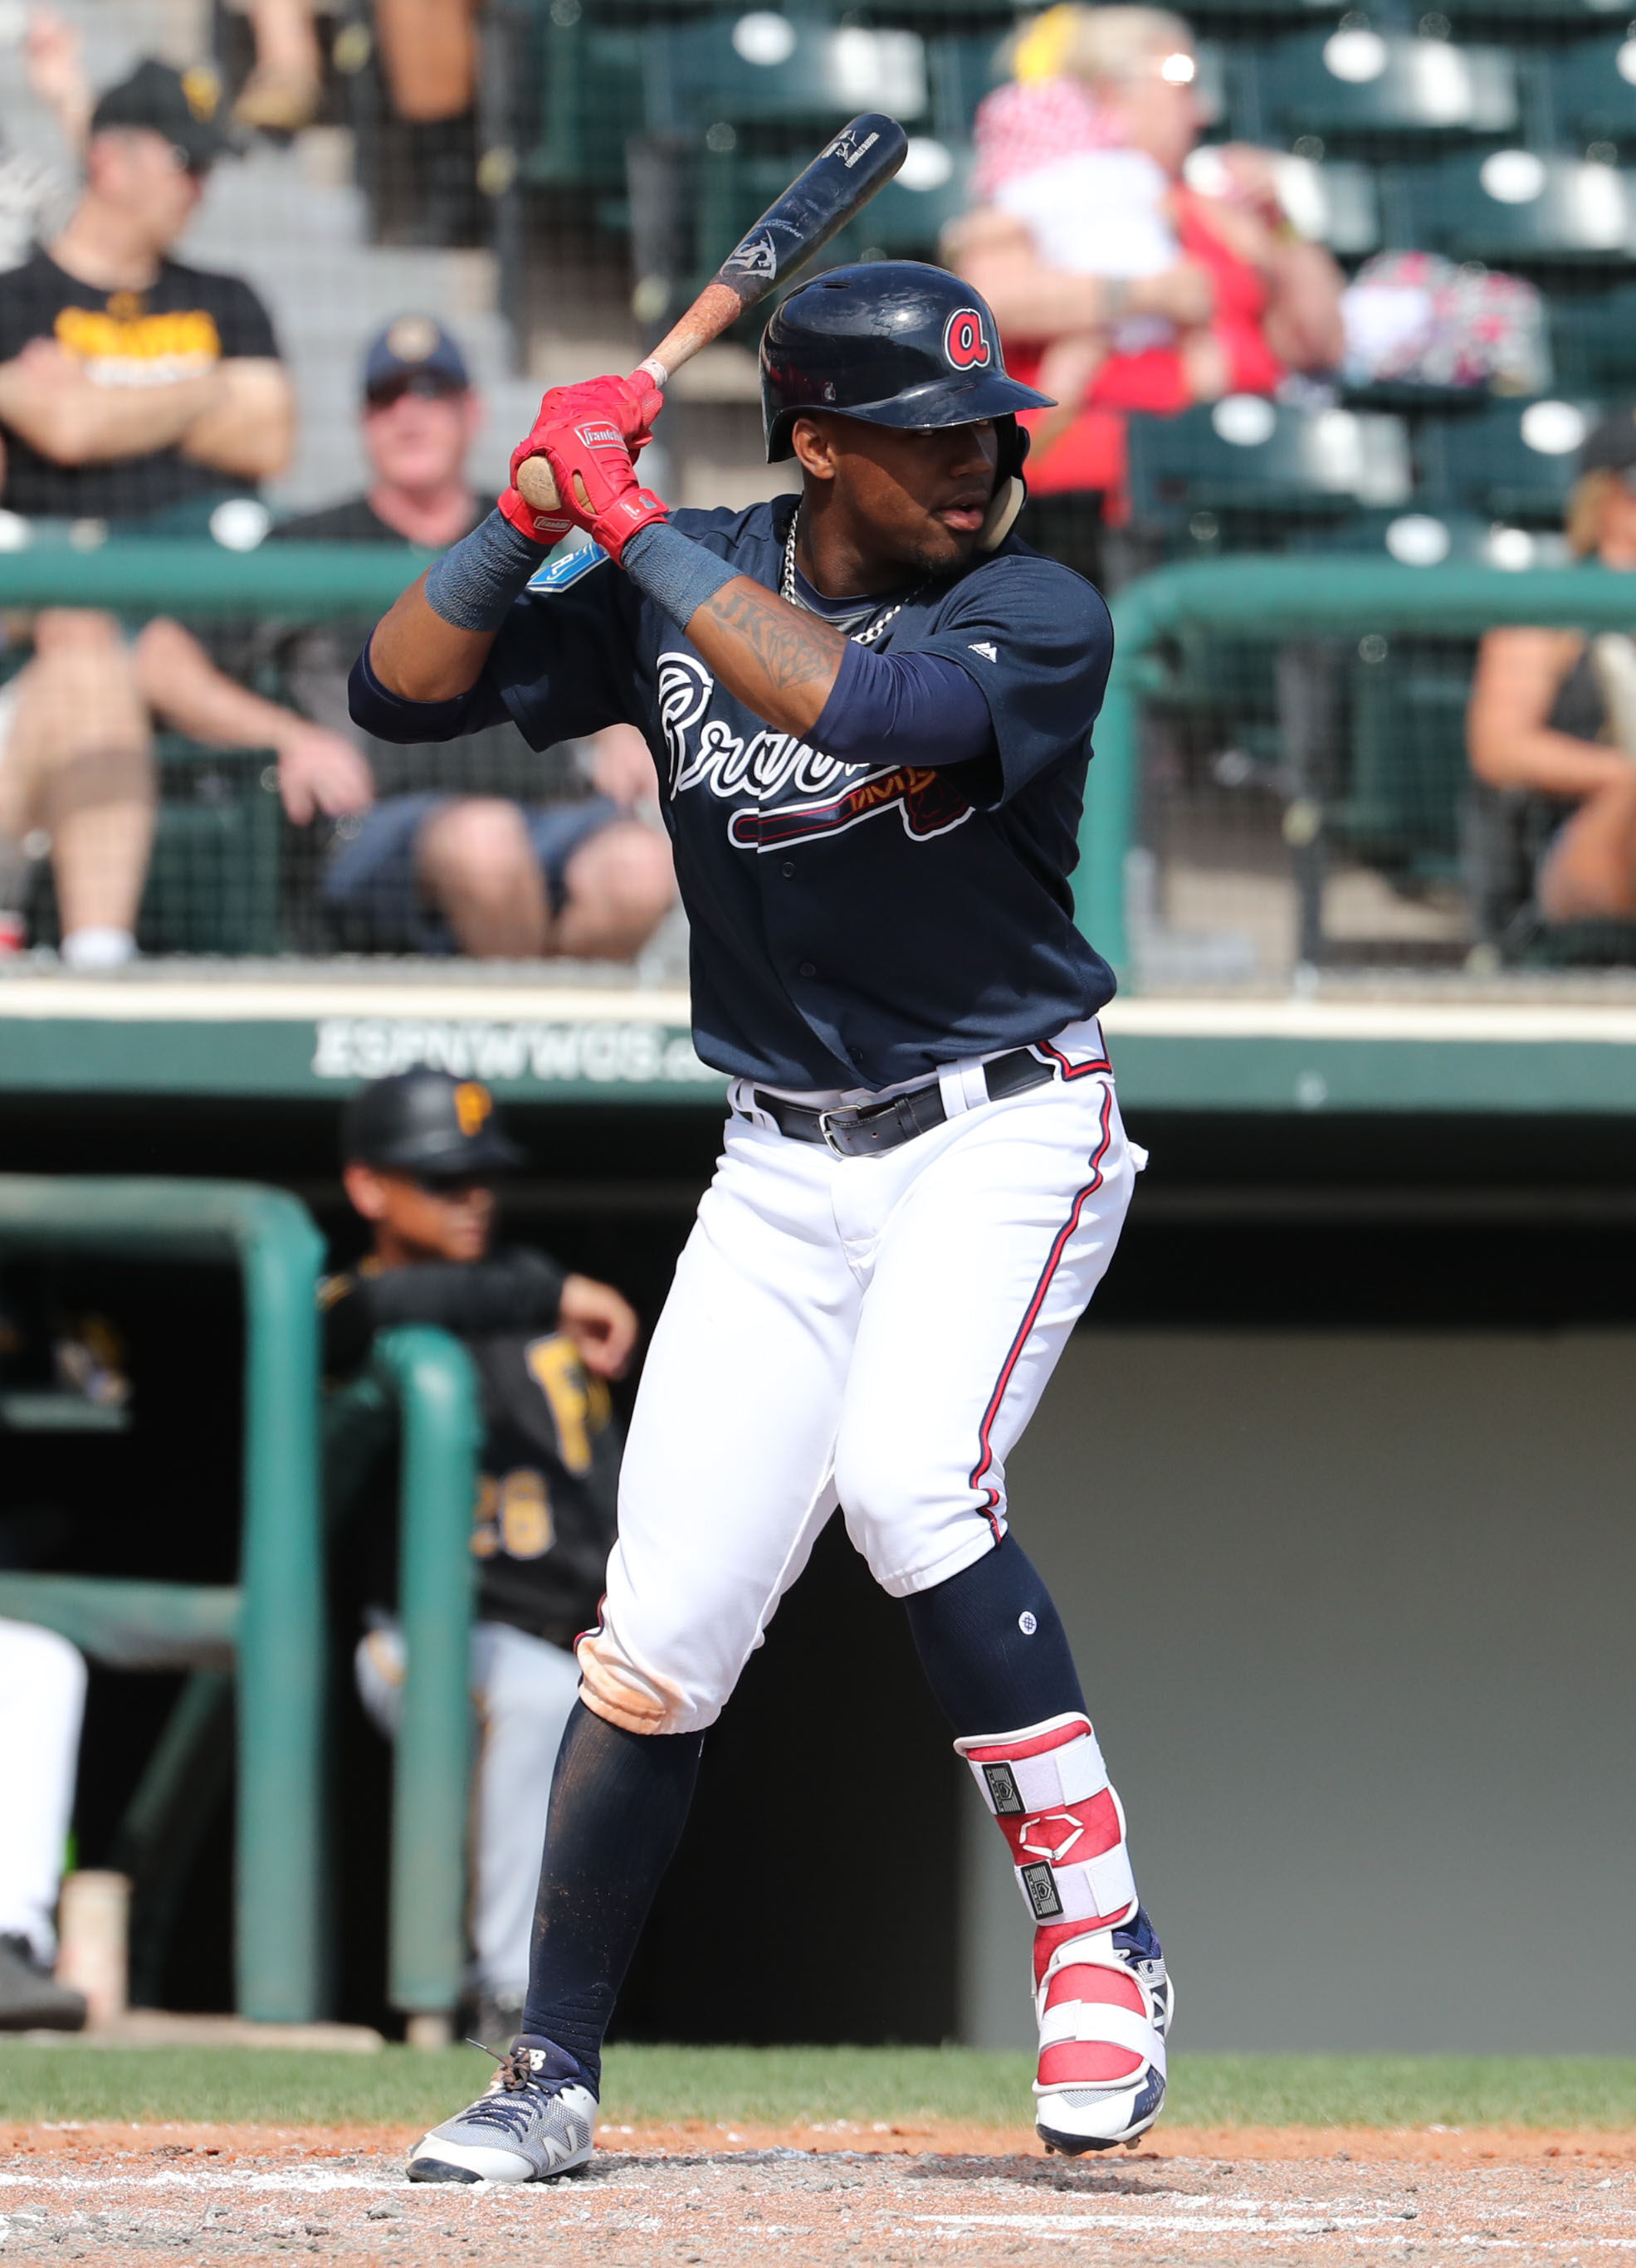 MLB - Ronald Acuña Jr. is the real deal.